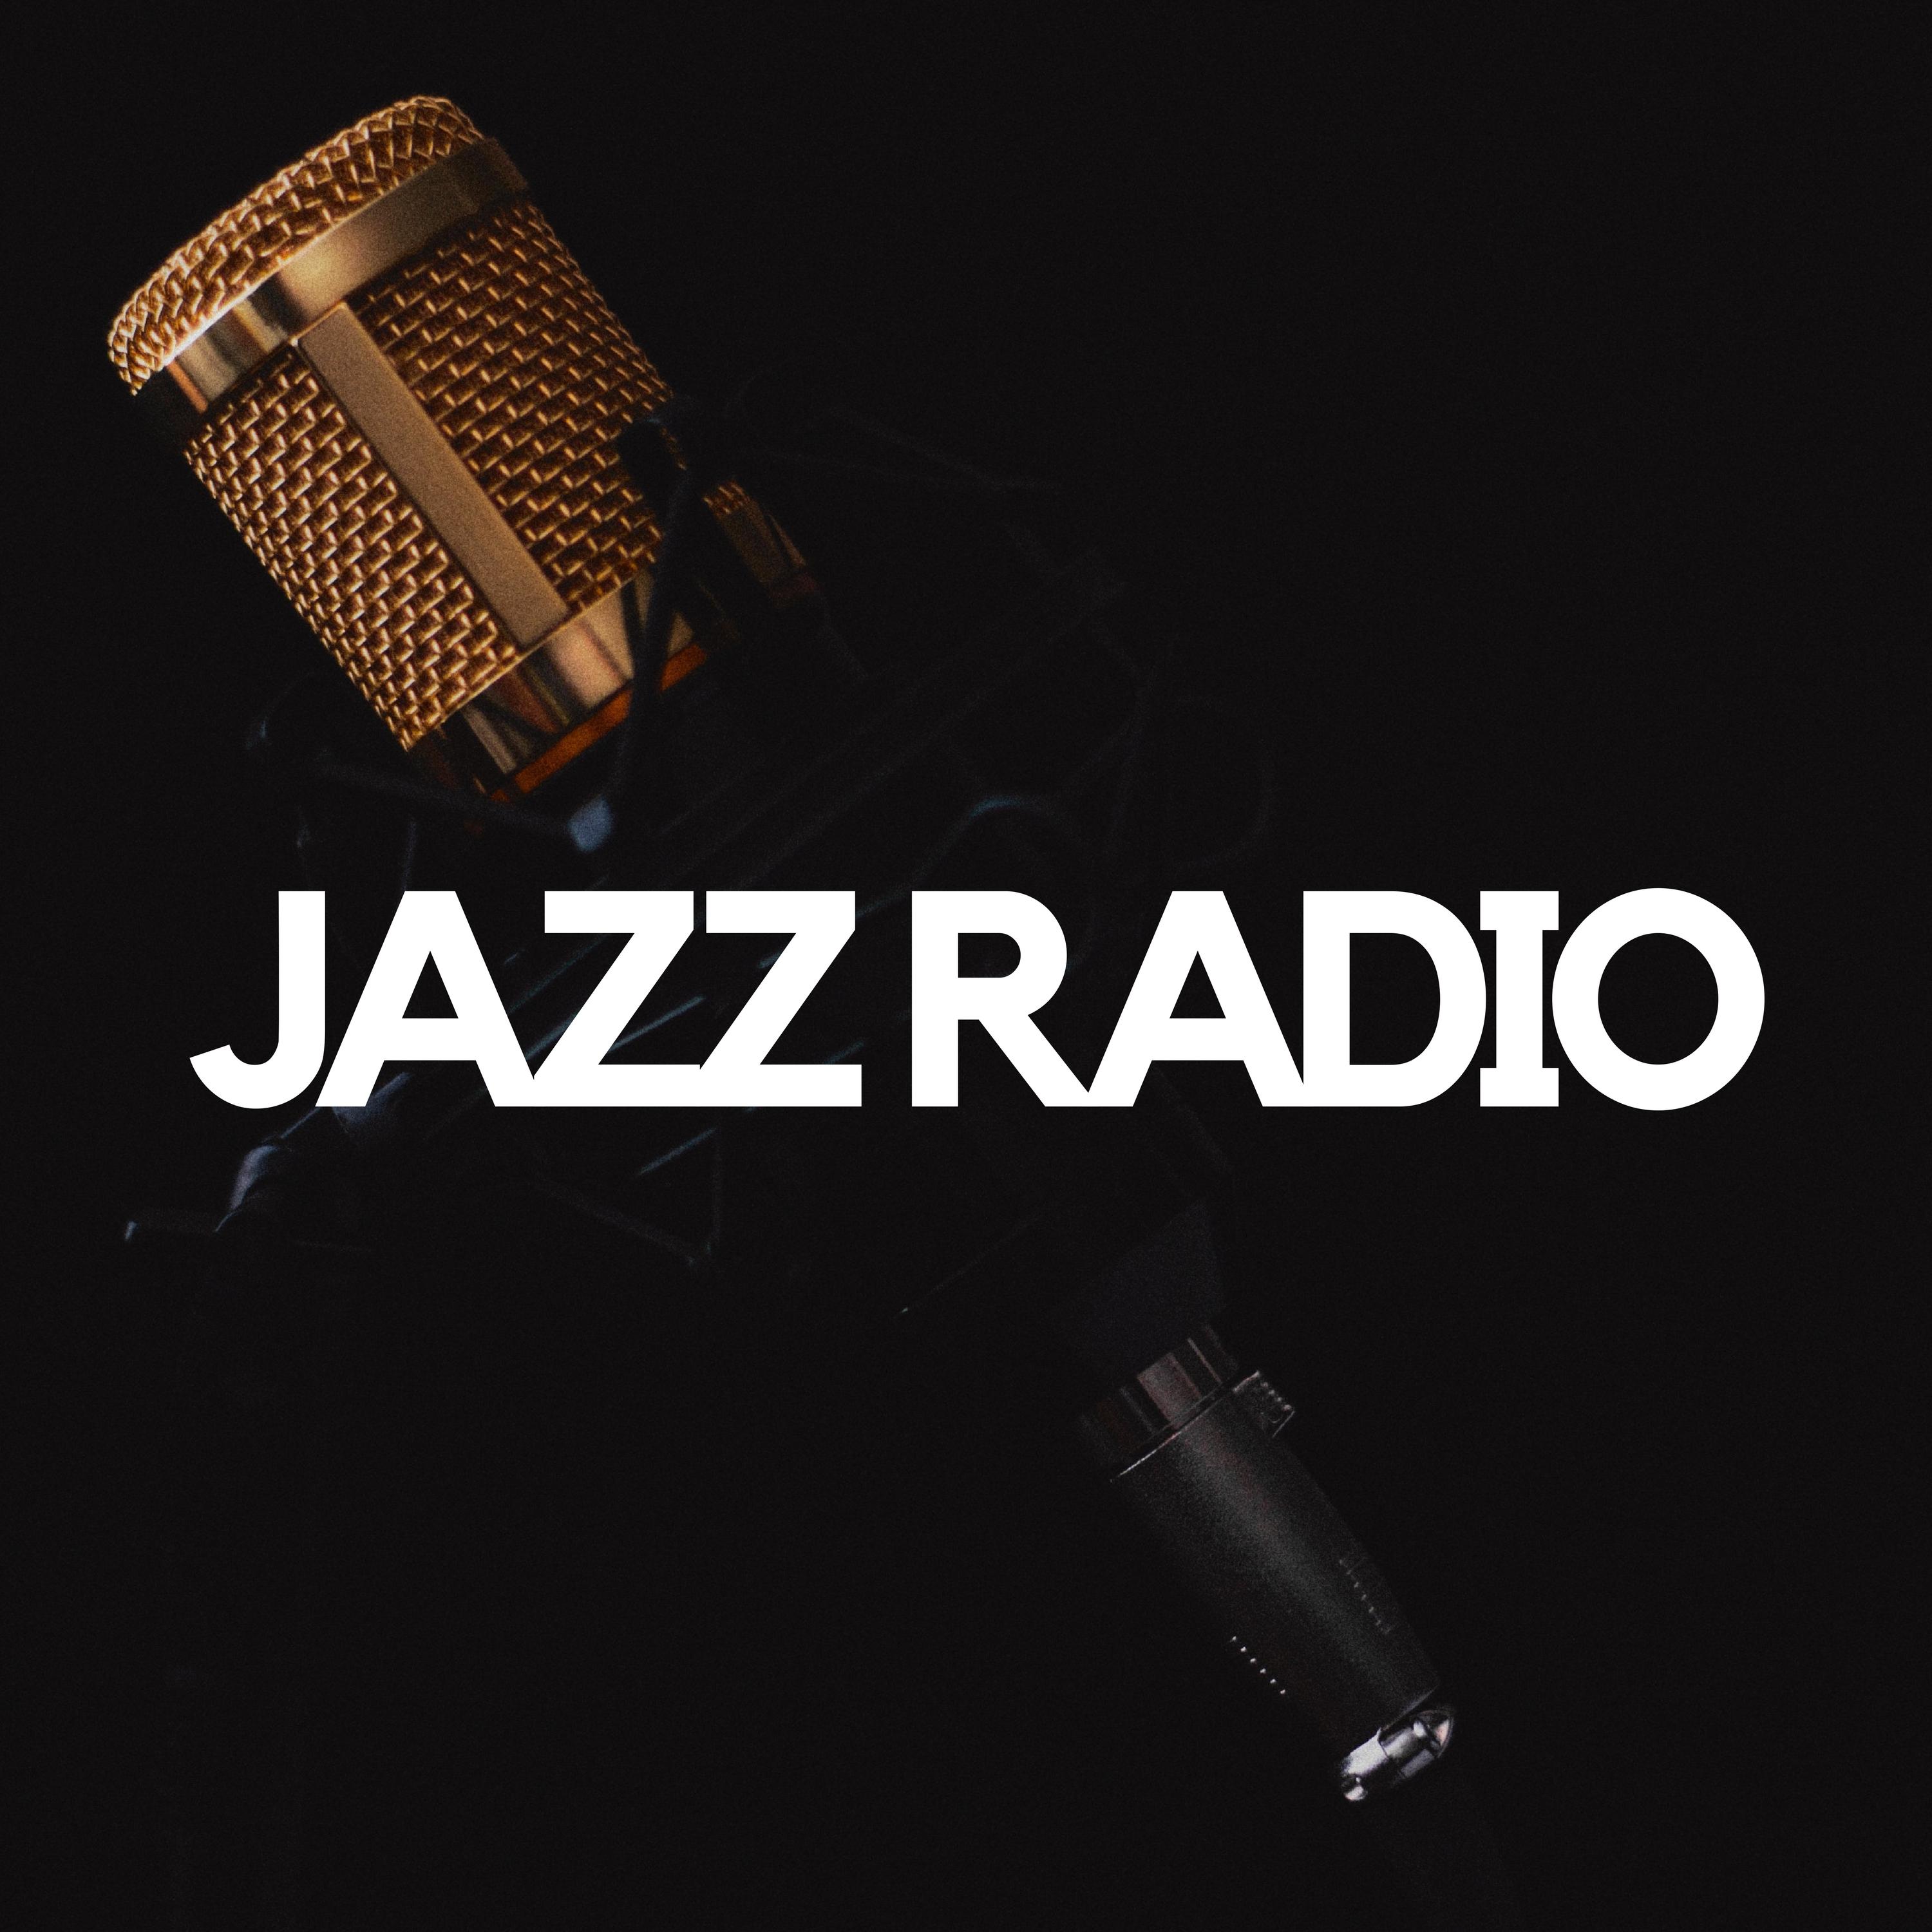 Jazz Radio - The Best Collection of Jazz Music Online, Smooth Jazz Songs, Cool Jazz Collection